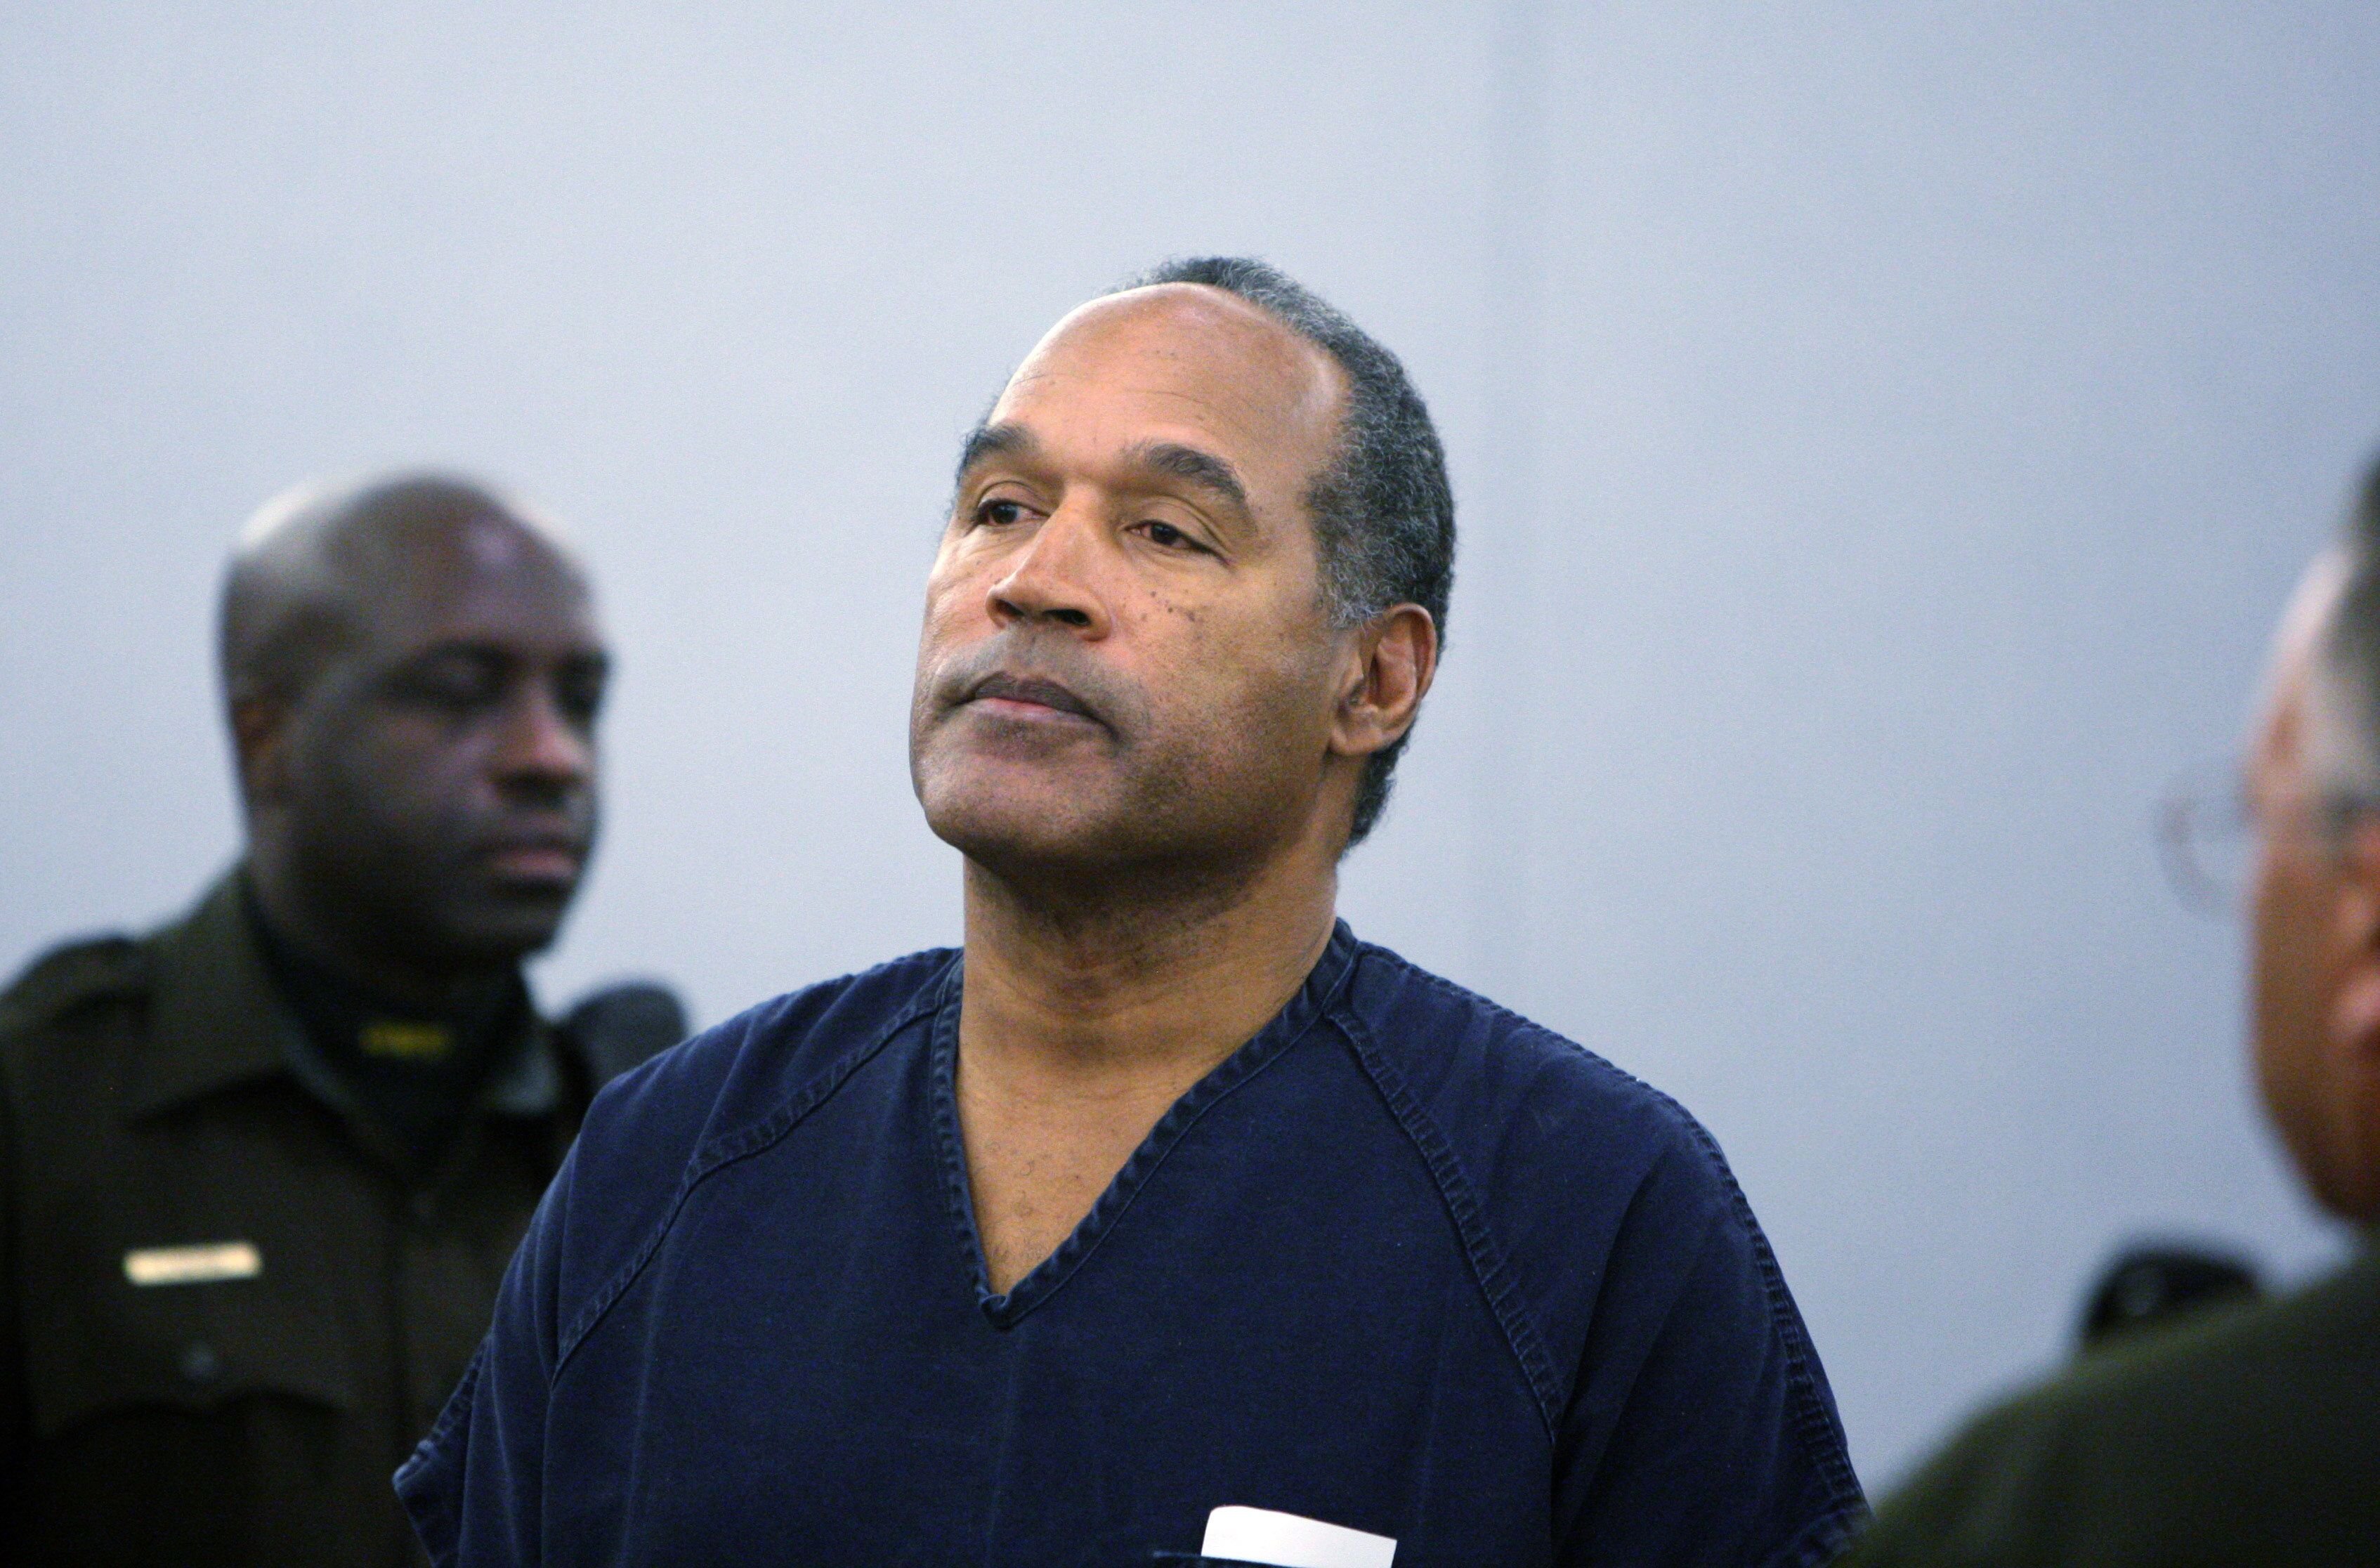 O.J. Simpson during his trial for armed robbery and kidnapping / Source: Getty Images